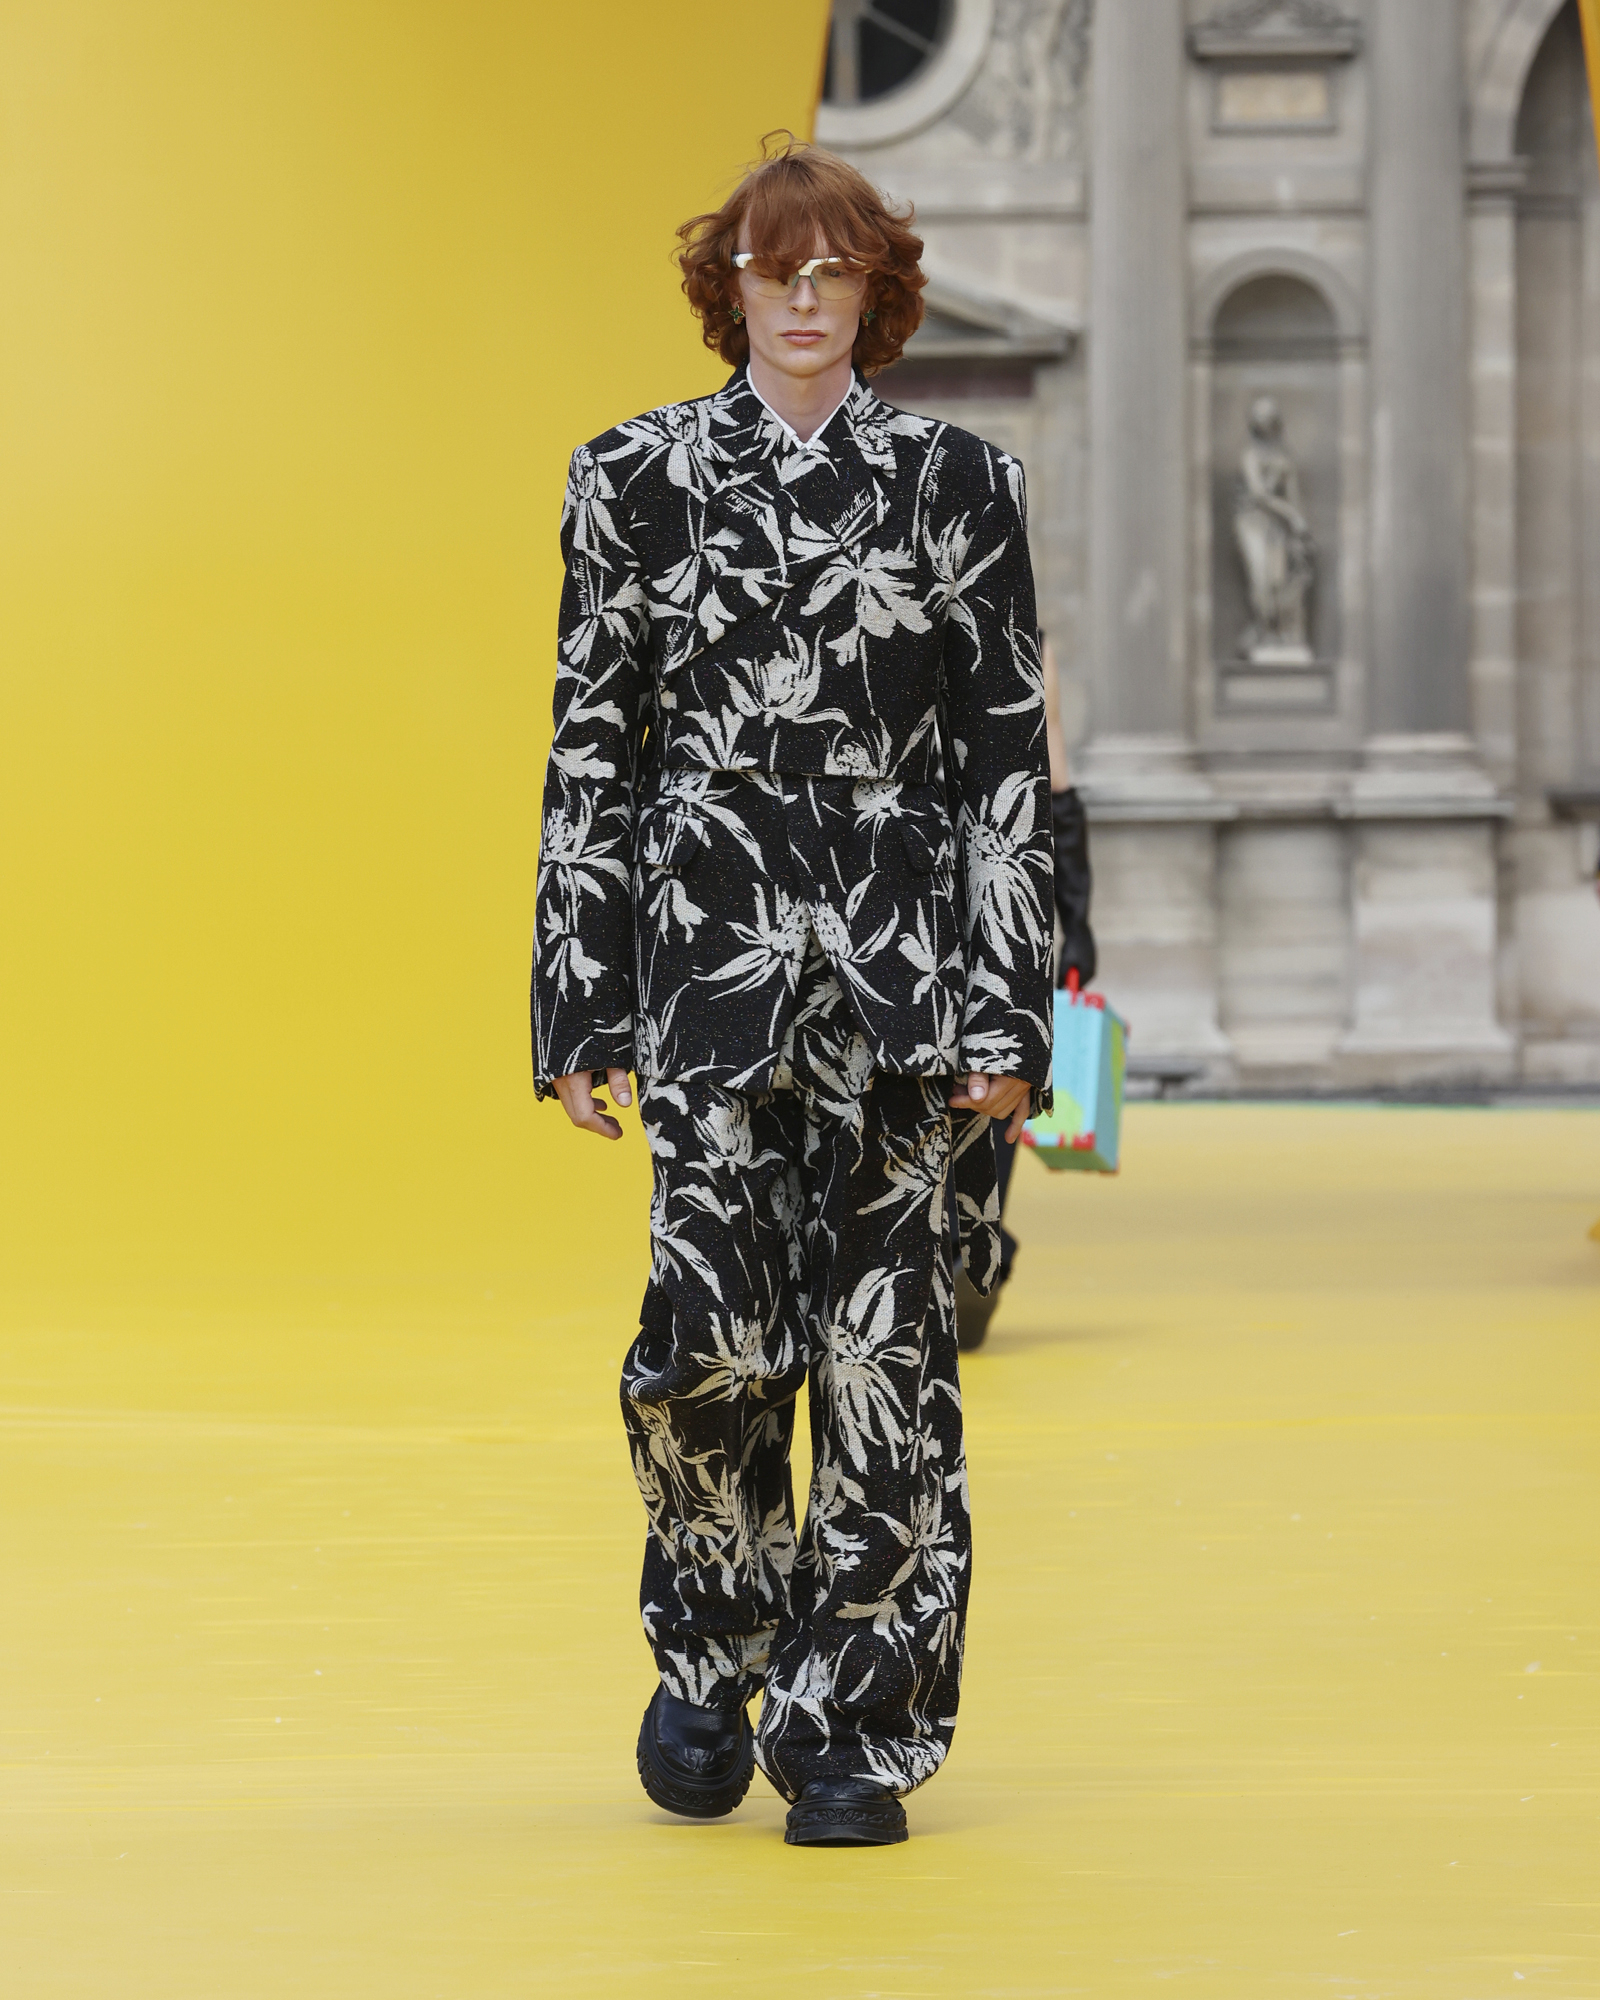 X \ LVMH على X: Discover @LouisVuitton 's Men's Spring/Summer 2023  collection, named Strange Math presented in the Carré du Louvre bringing  together imagination and reality. Learn more:  #LVMH  #LouisVuitton